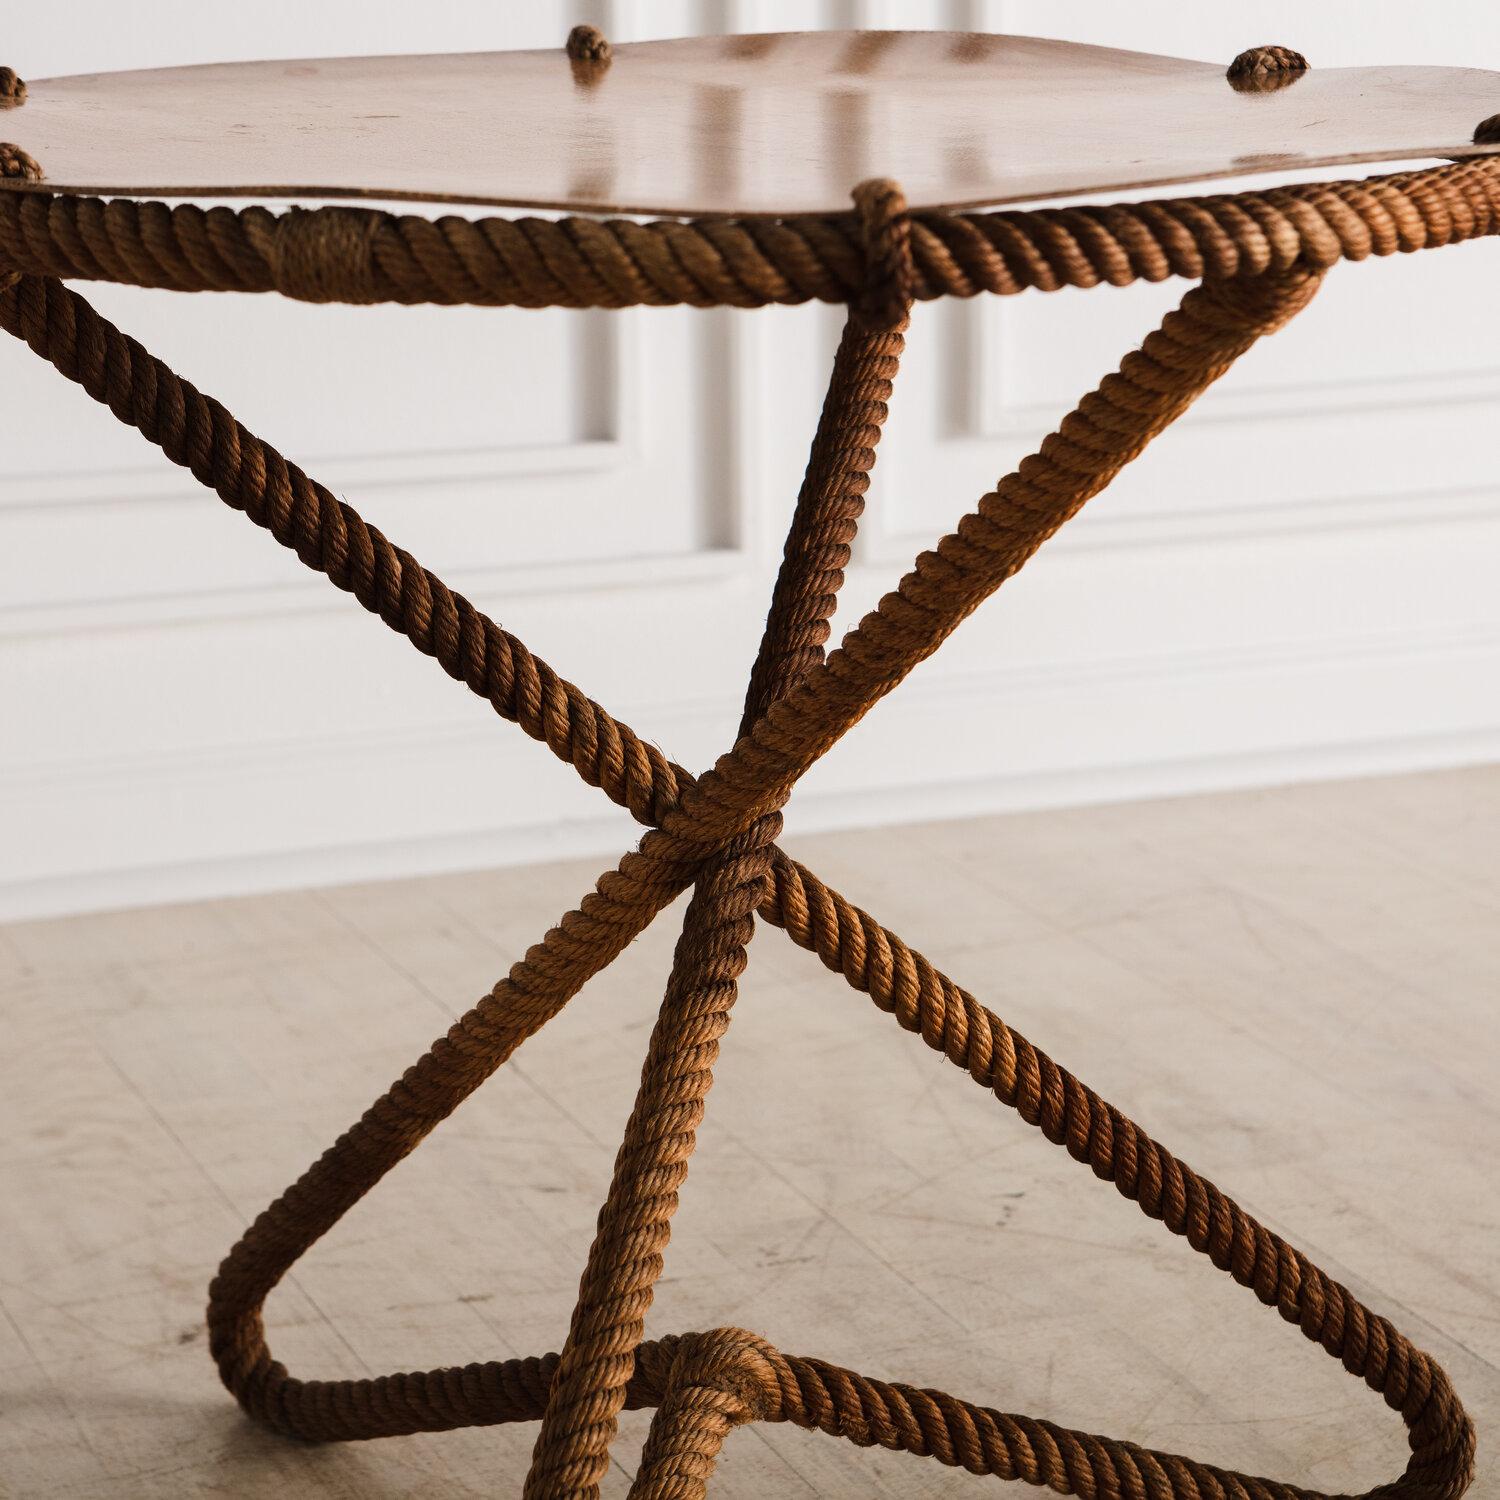 A mid century French Rope side table with a tripod shaped base and a resin top with a fibrous crosshatch pattern.